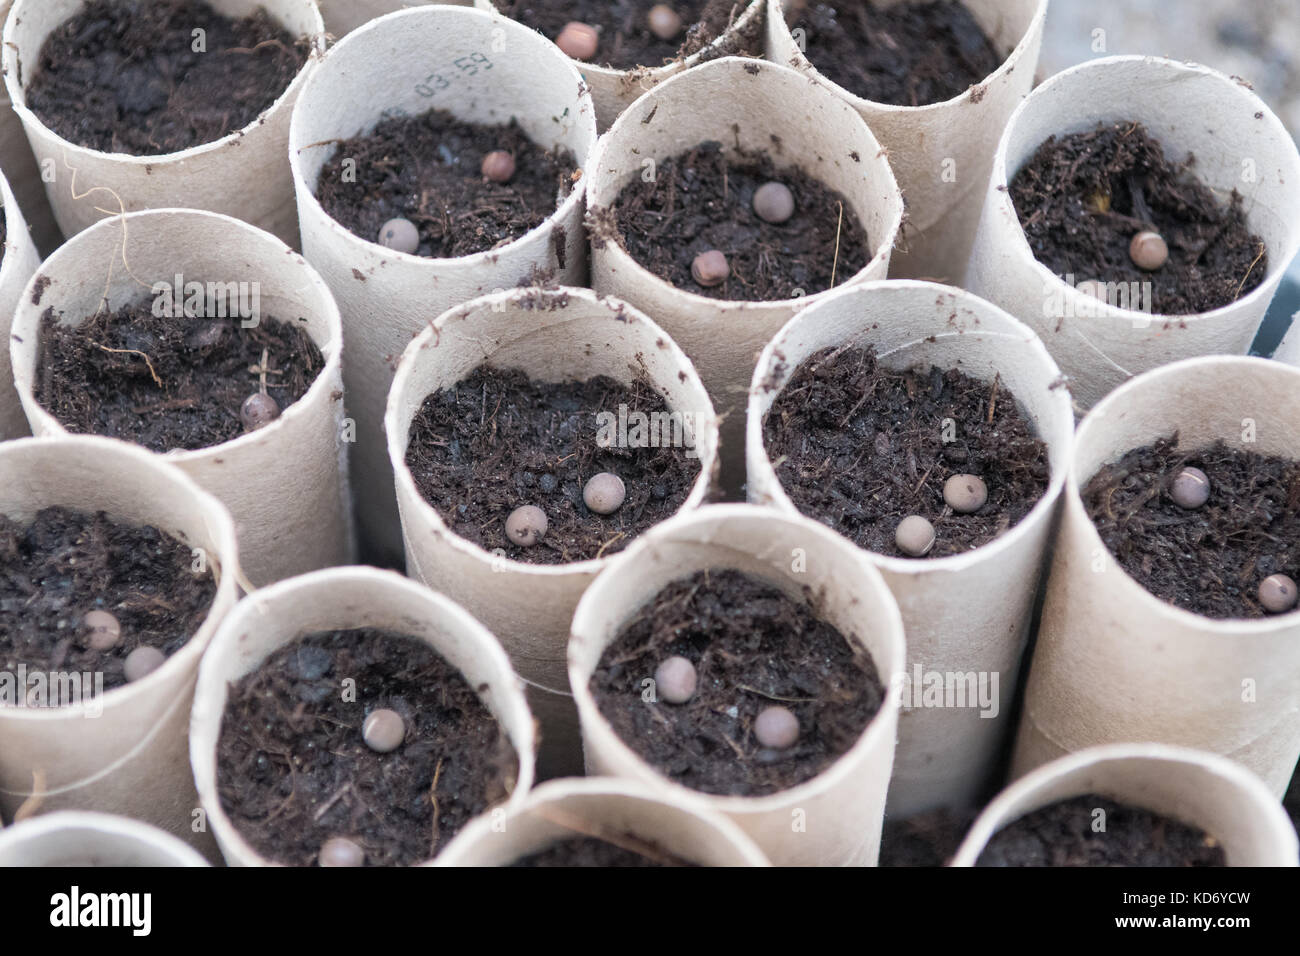 Sowing sweet pea seeds Stock Photo